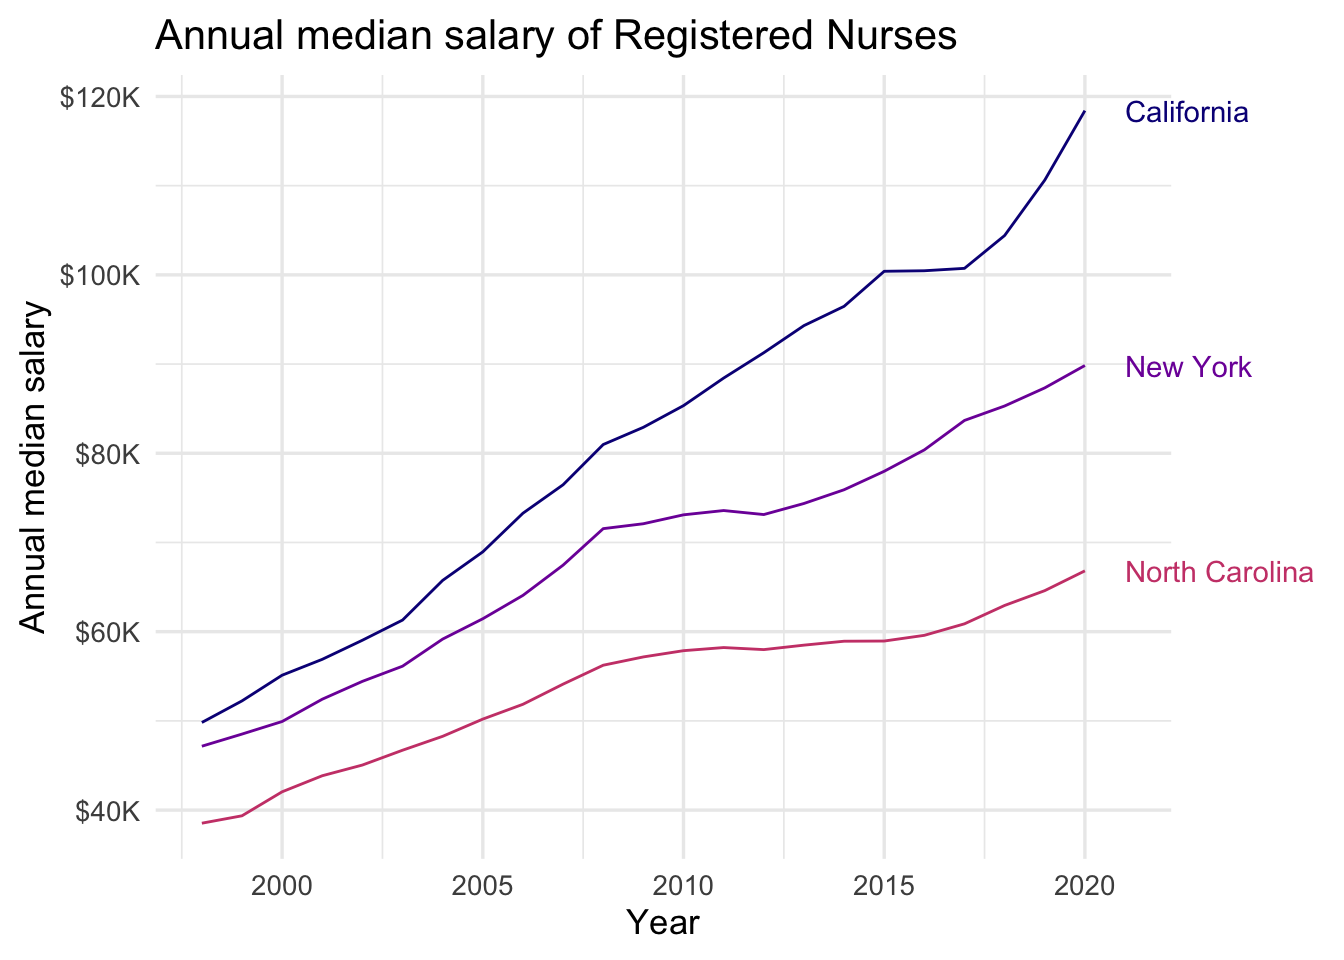 The figure is titled "Annual median salary of Registered Nurses". There are three lines on the plot: the top labelled California, the middle New York, the bottom North Carolina. The vertical axis is labelled "Annual median salary", beginning with $40K, up to $120K. The horizontal axis is labelled "Year", beginning with couple years before 2000 up to 2020. The following numbers are all approximate. In the graph, the California line begins around $50K in 1998 and goes up to  $120K in 2020. The increase is steady, except for stalling for about couple years between 2015 to 2017. The New York line also starts around $50K, just below where the California line starts, and steadily goes up to $90K. And the North Carolina line starts around $40K and steadily goes up to $70K.